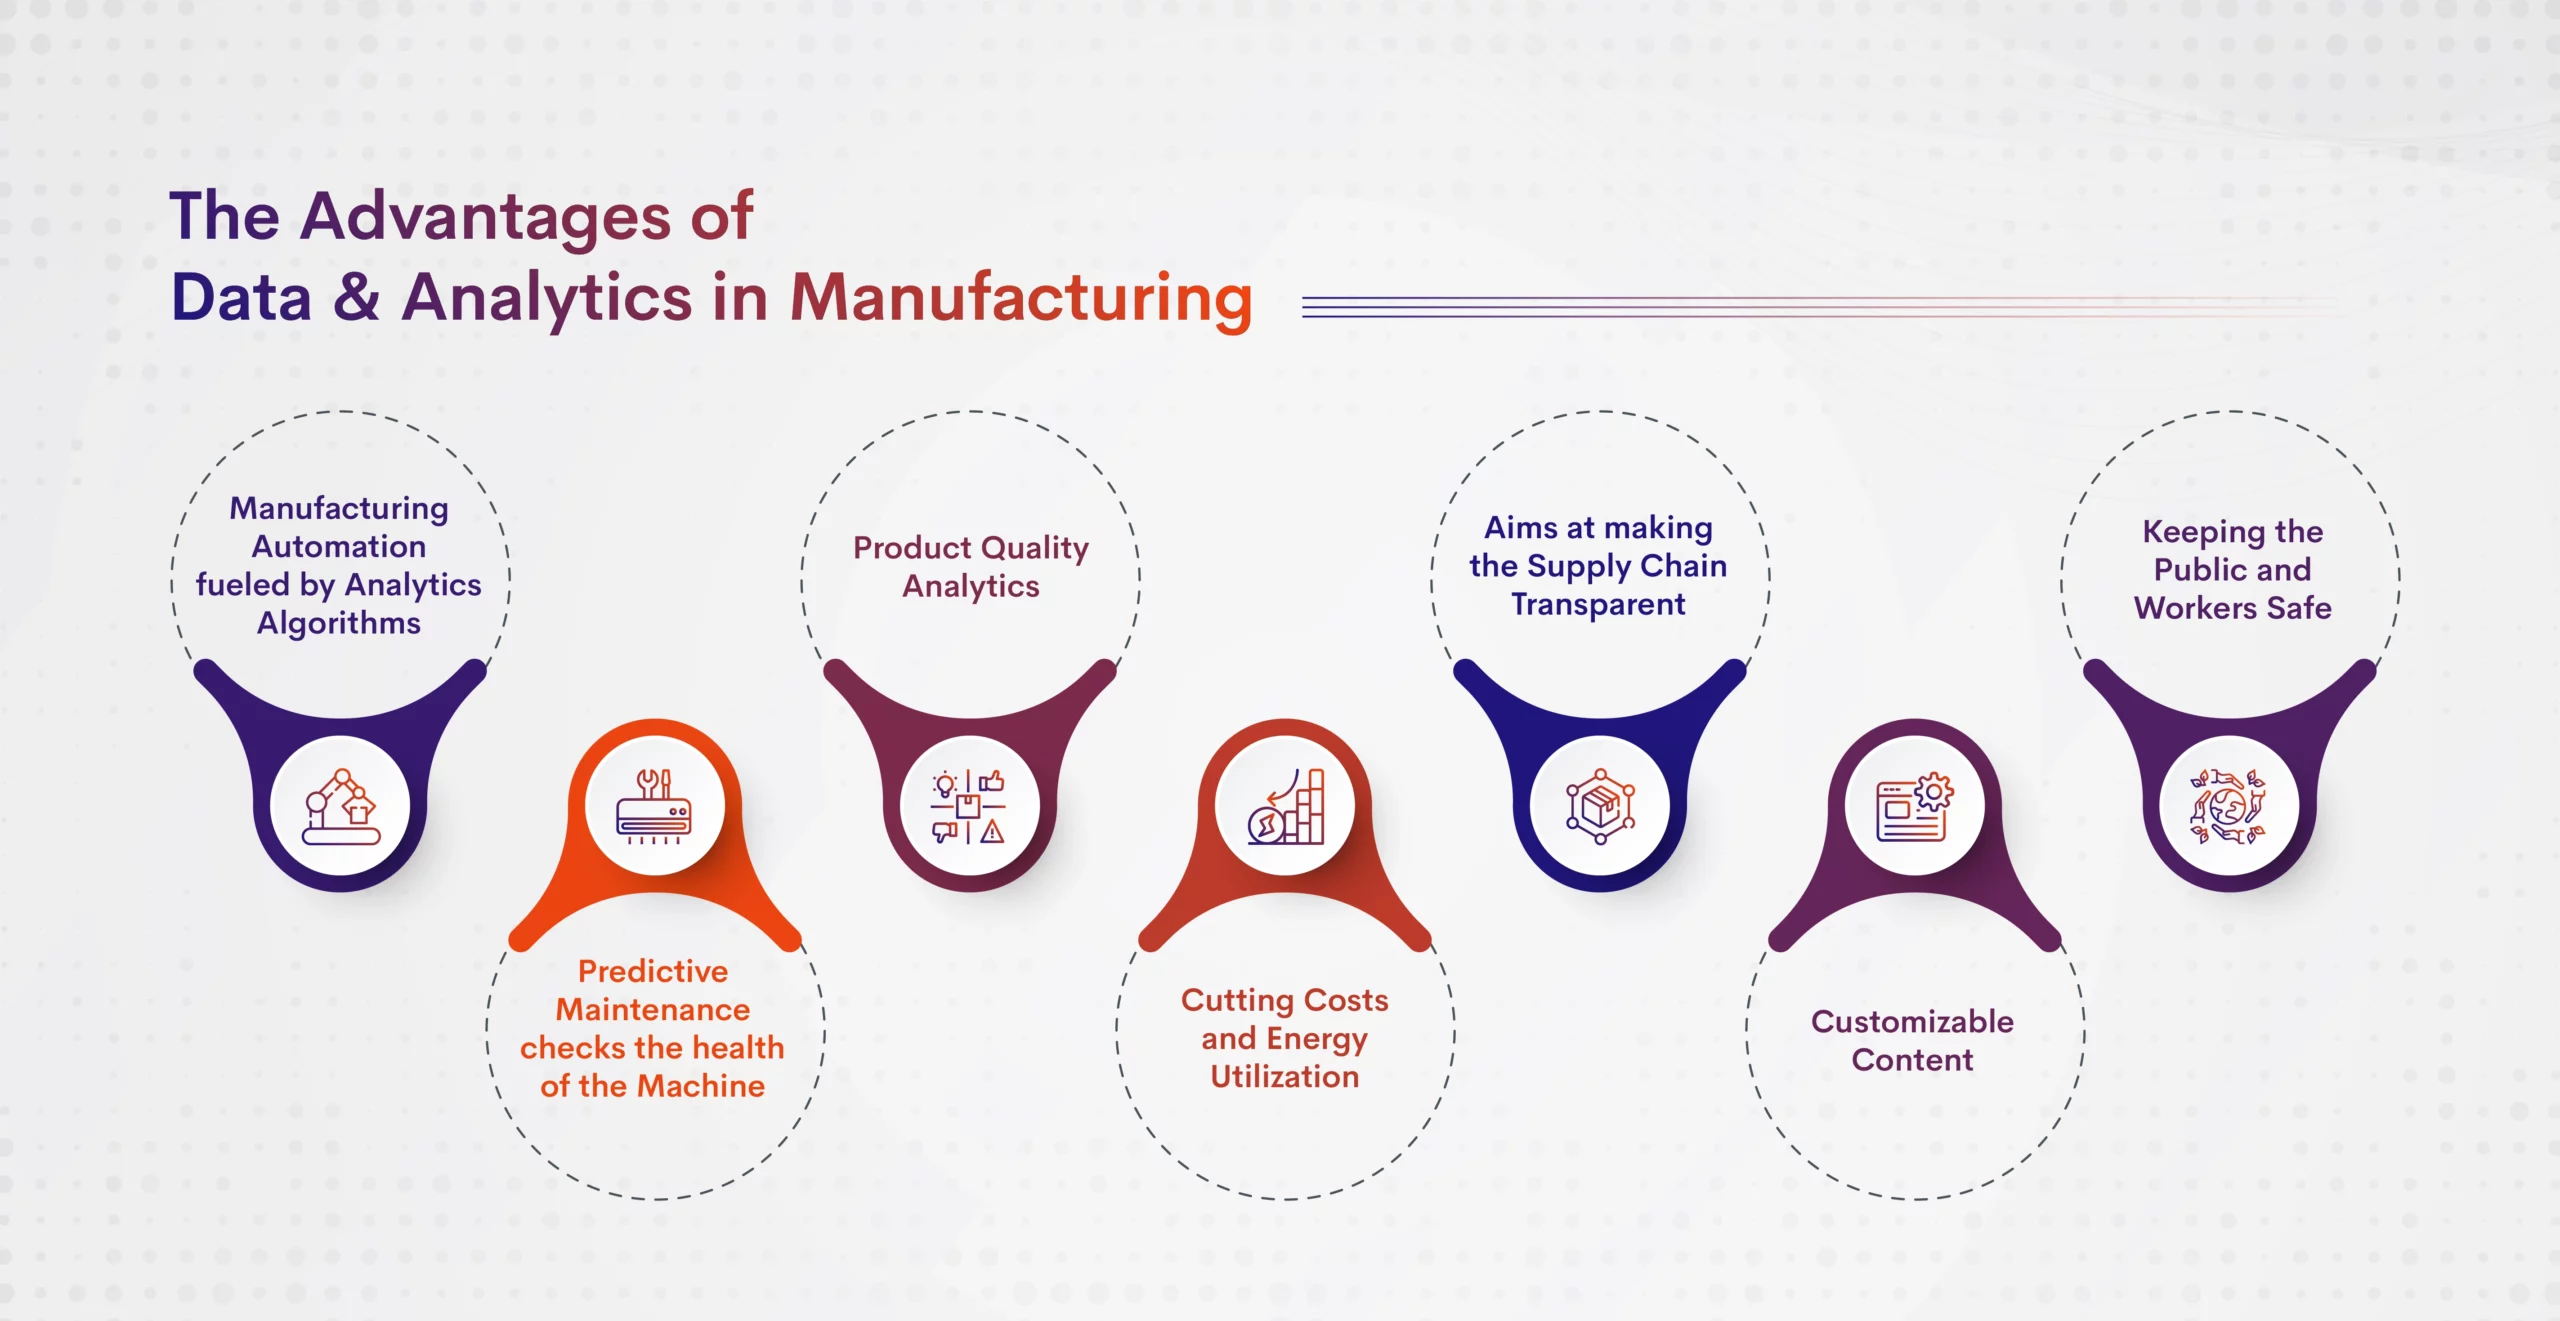 The Advantages of Data & Analytics in modern manufacturing industry